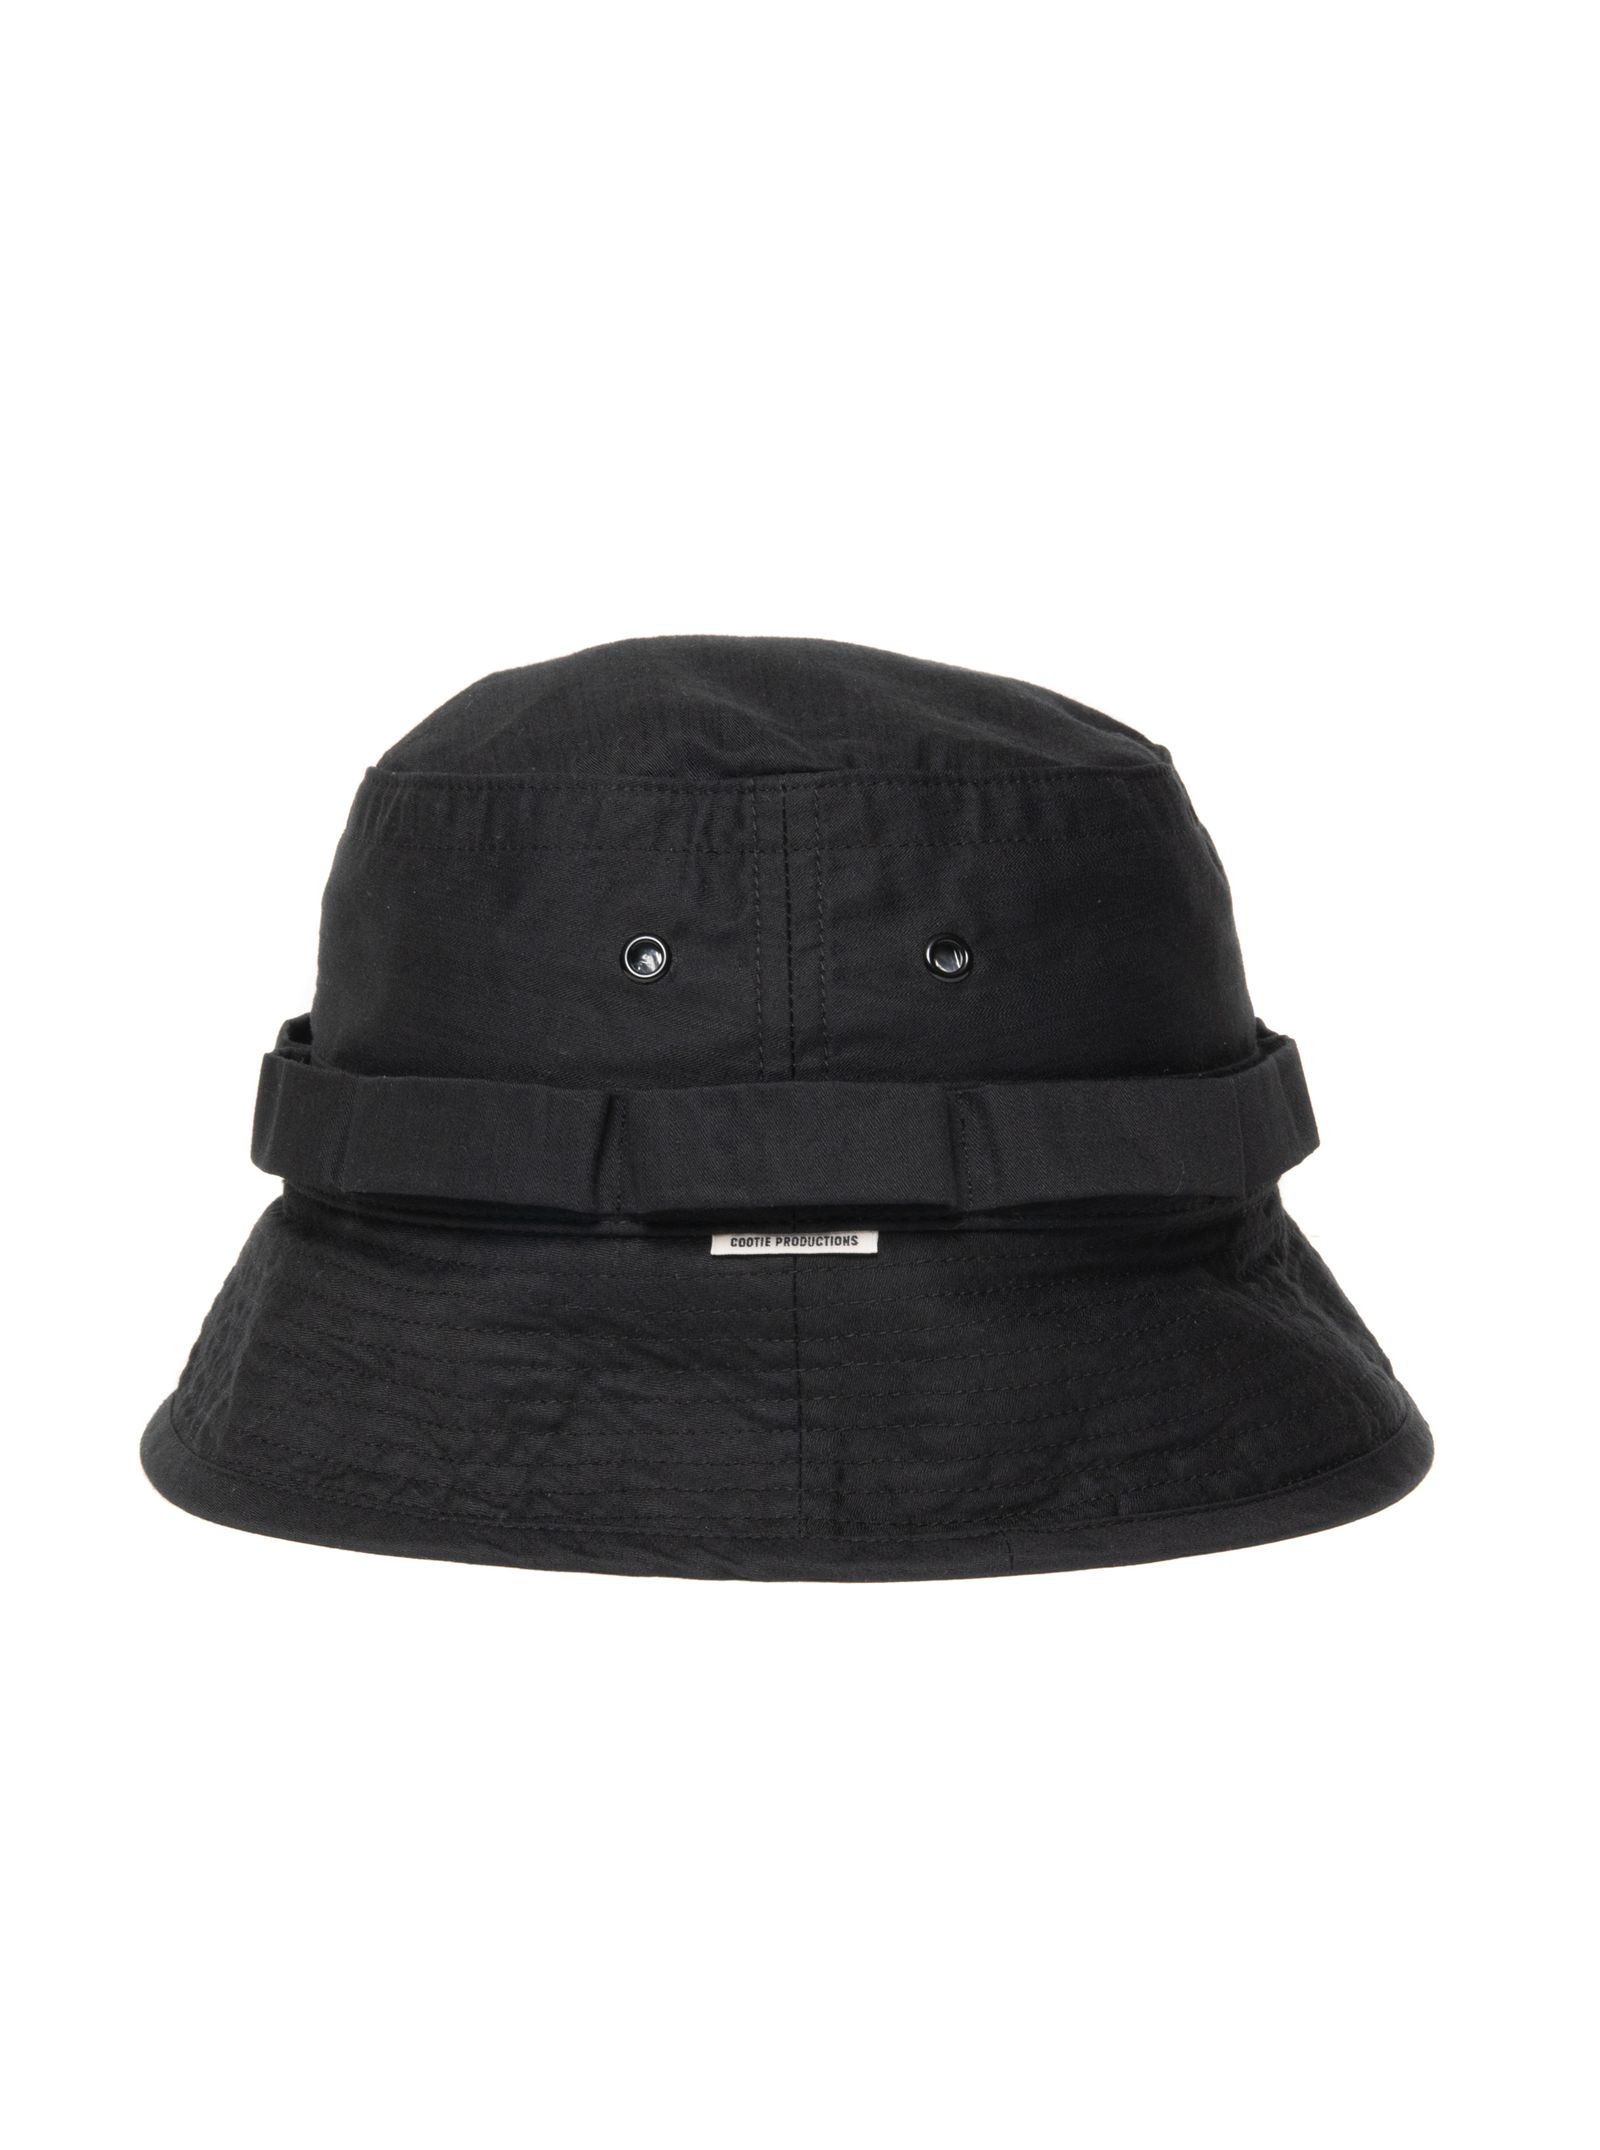 COOTIE PRODUCTIONS - Back Satin Boonie Bucket Hat (BLACK 